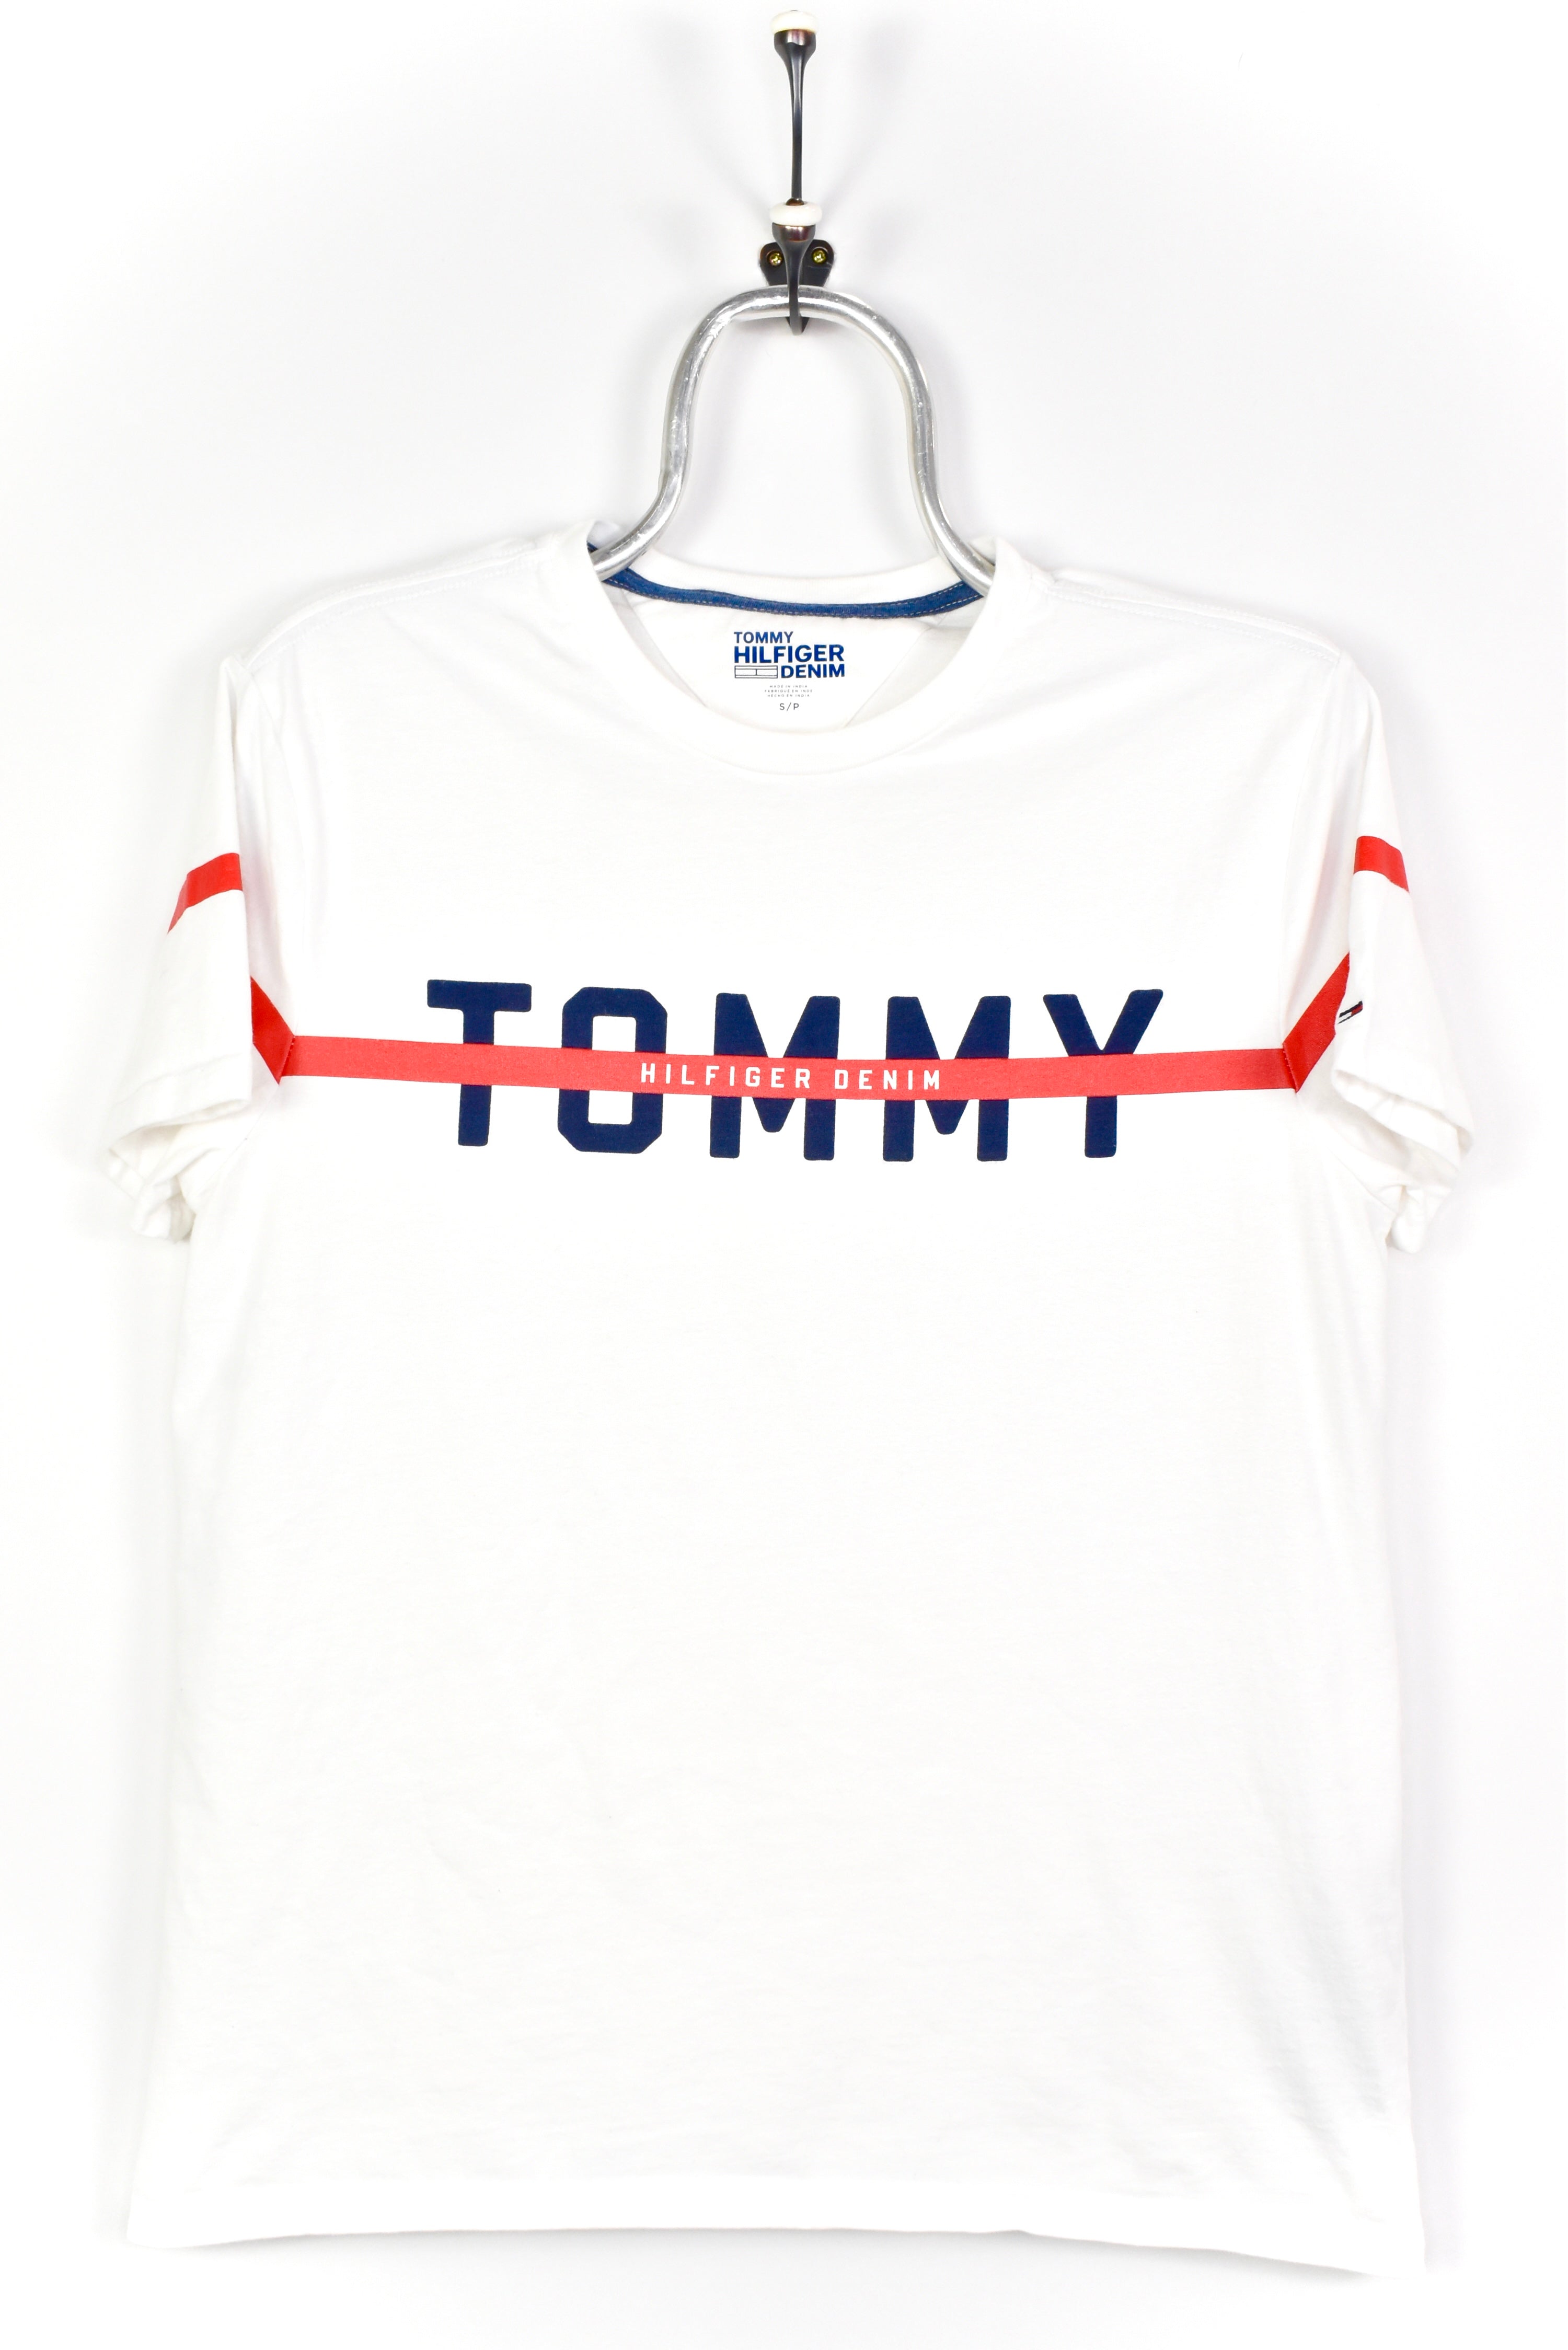 TOMMY HILFIGER WHITE T-SHIRT | SMALL TOMMY HILFIGER